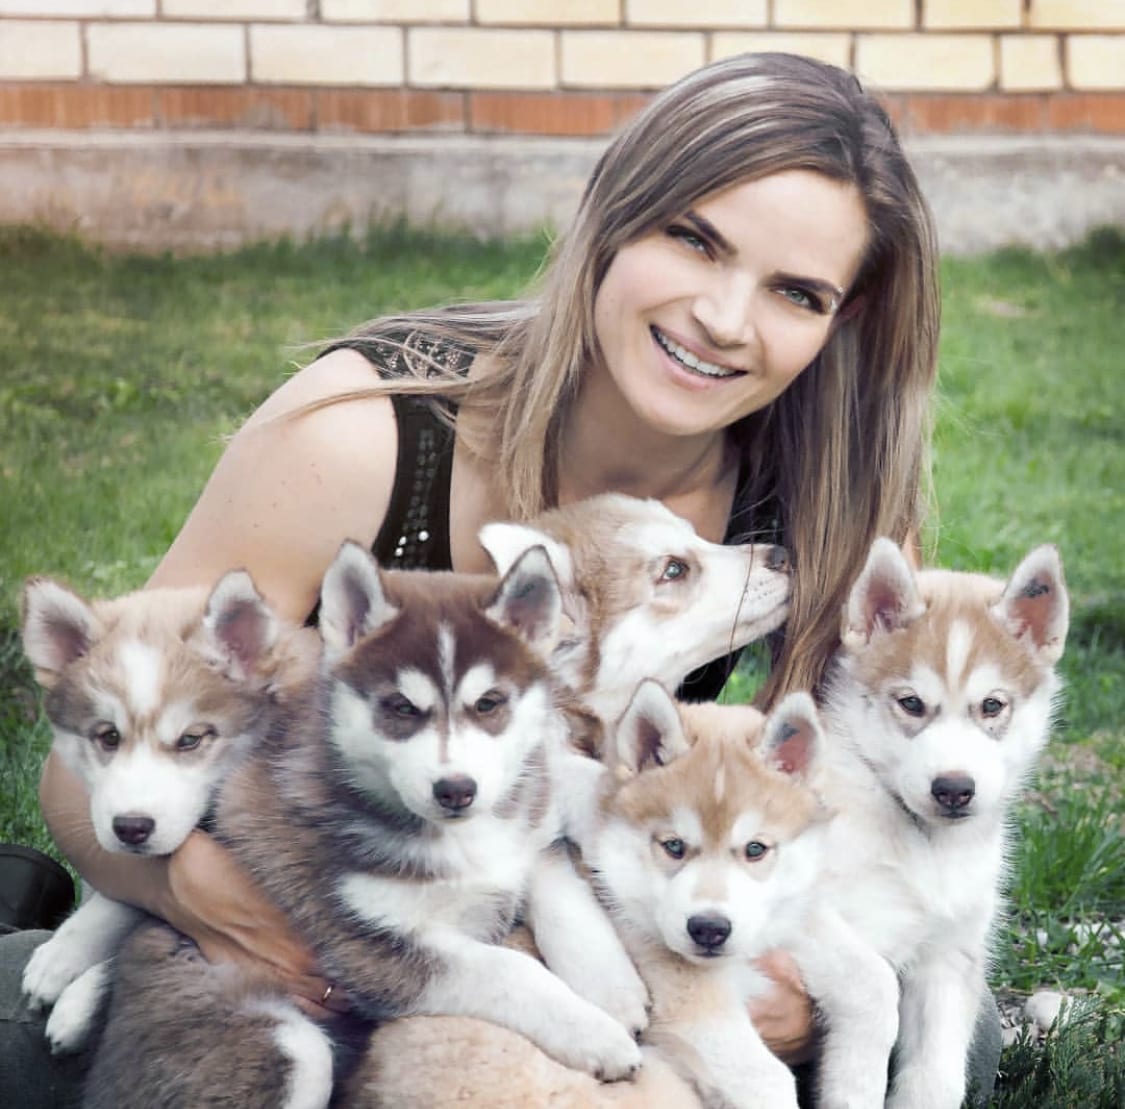 A woman sitting on the grass with her five Husky puppies